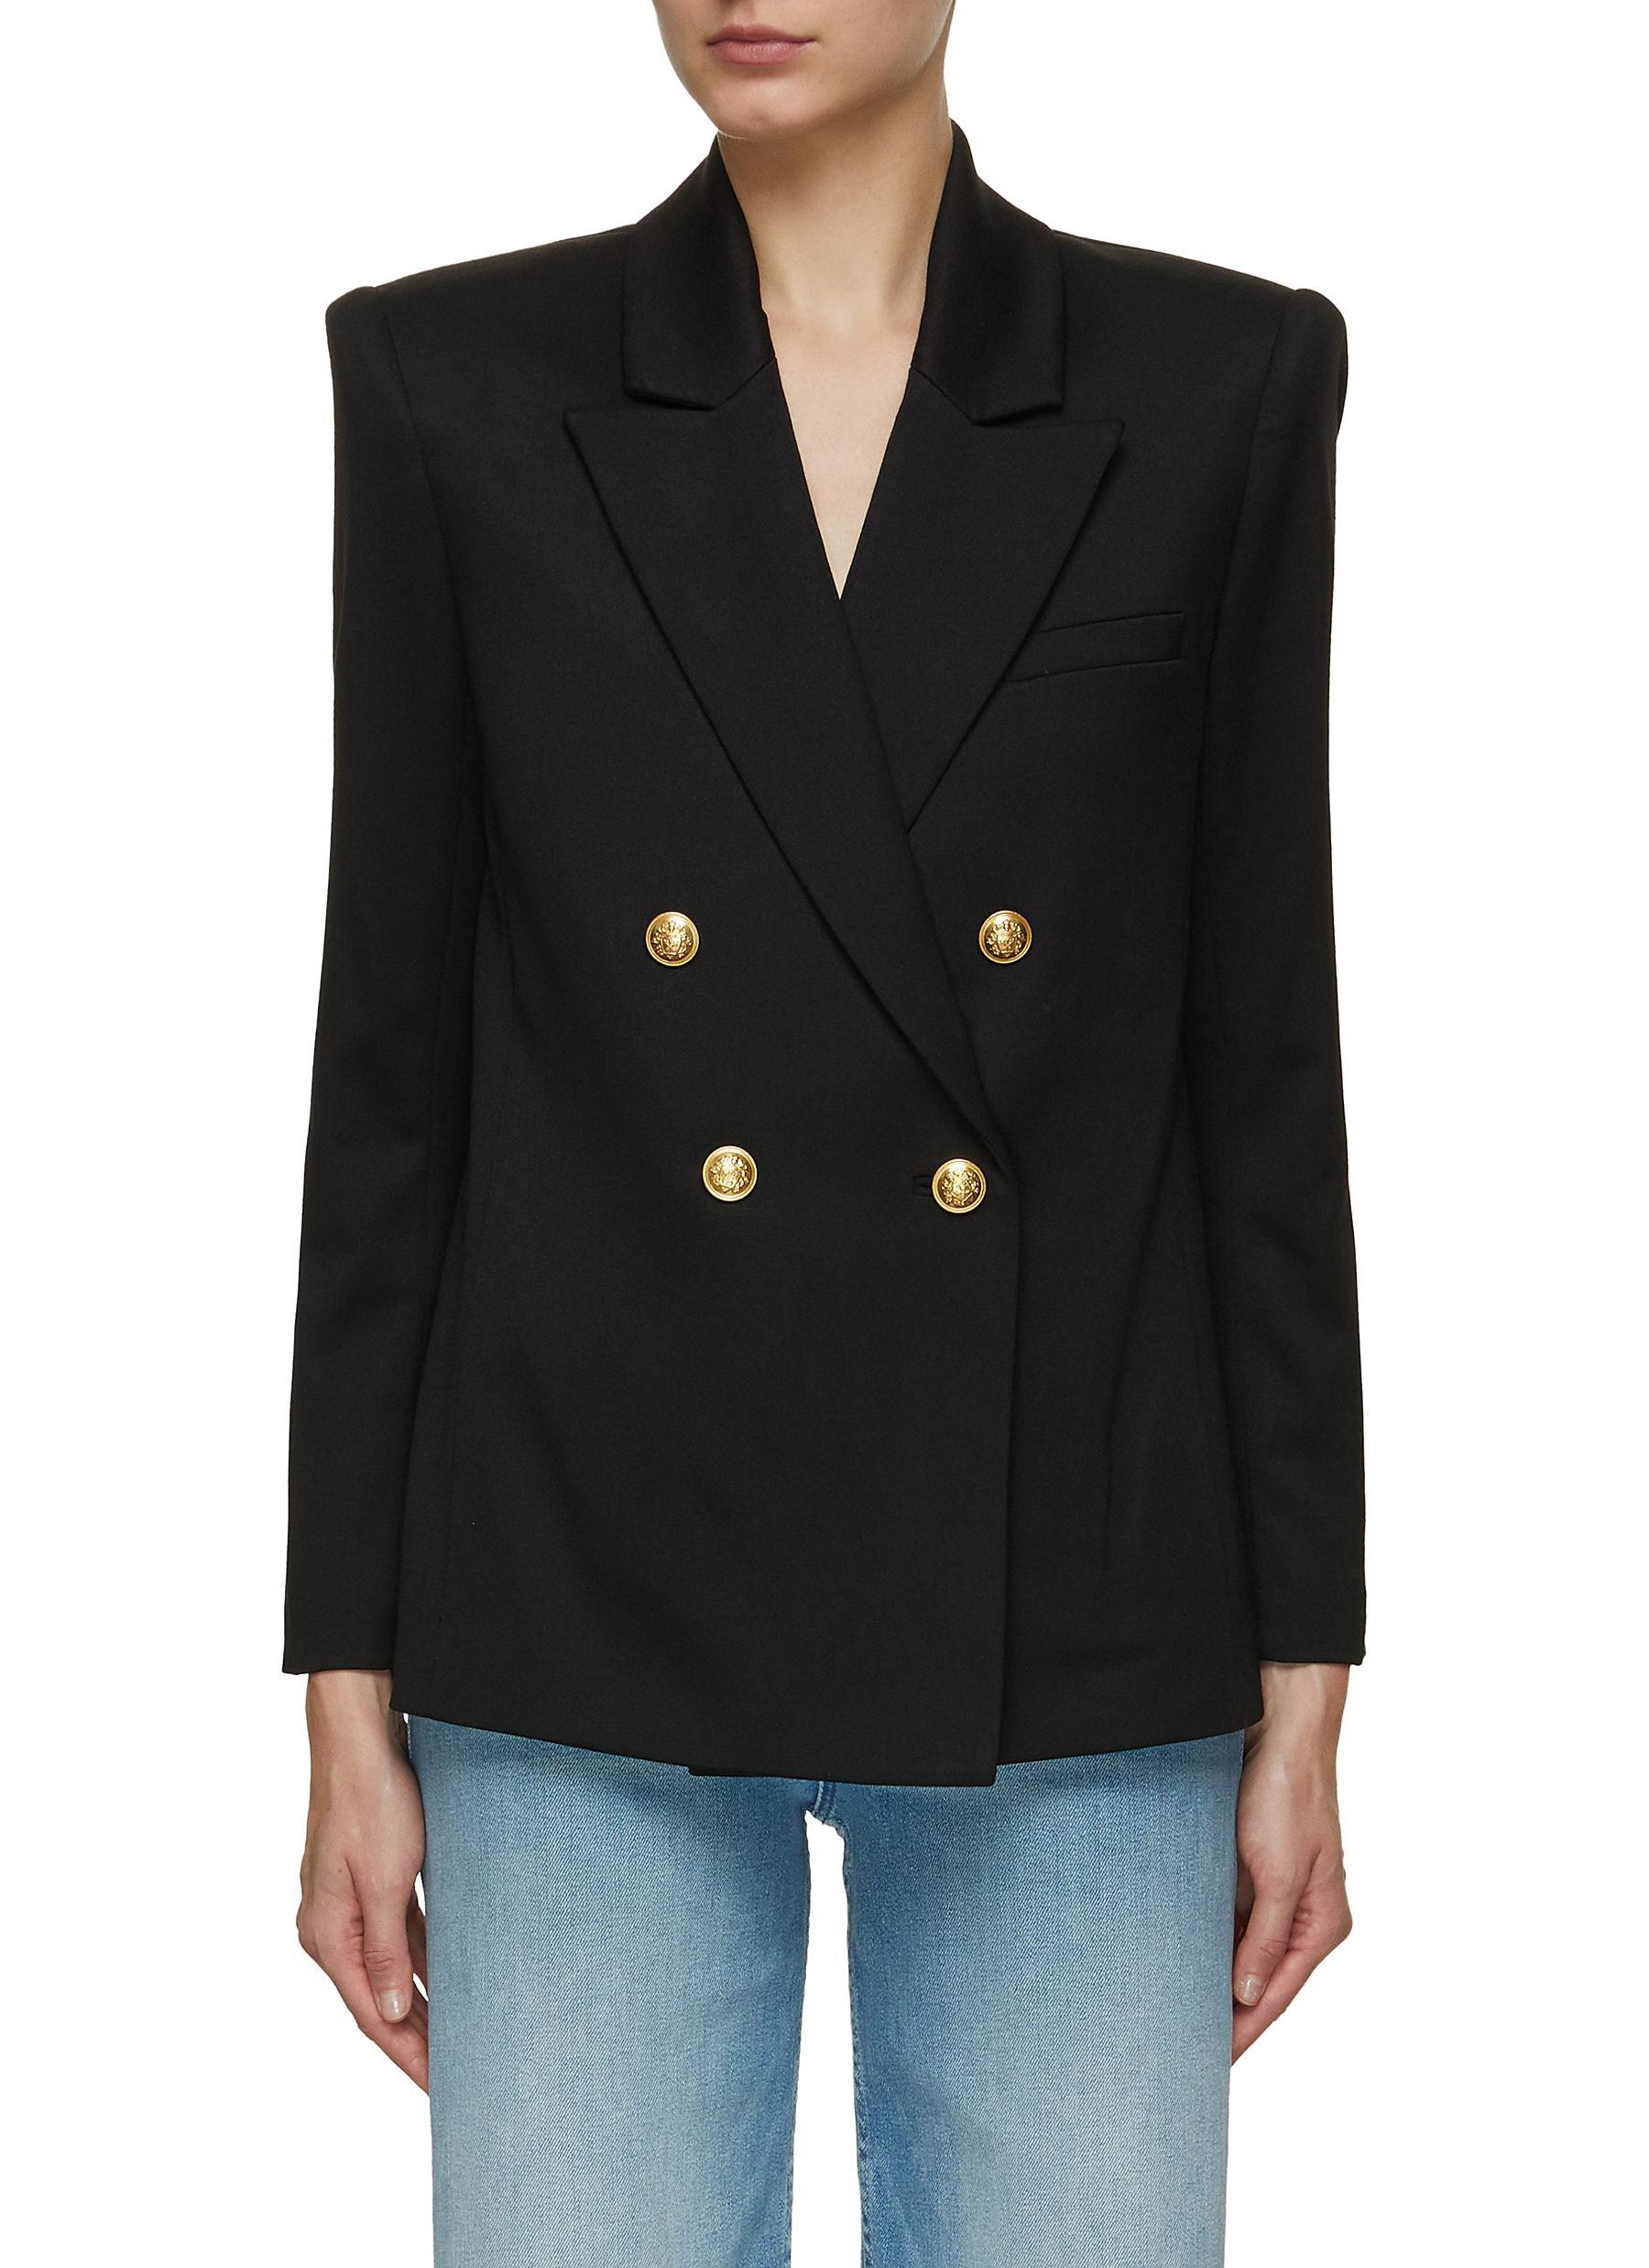 Alice + Olivia Anthony Double Breasted Blazer in Black | Lyst